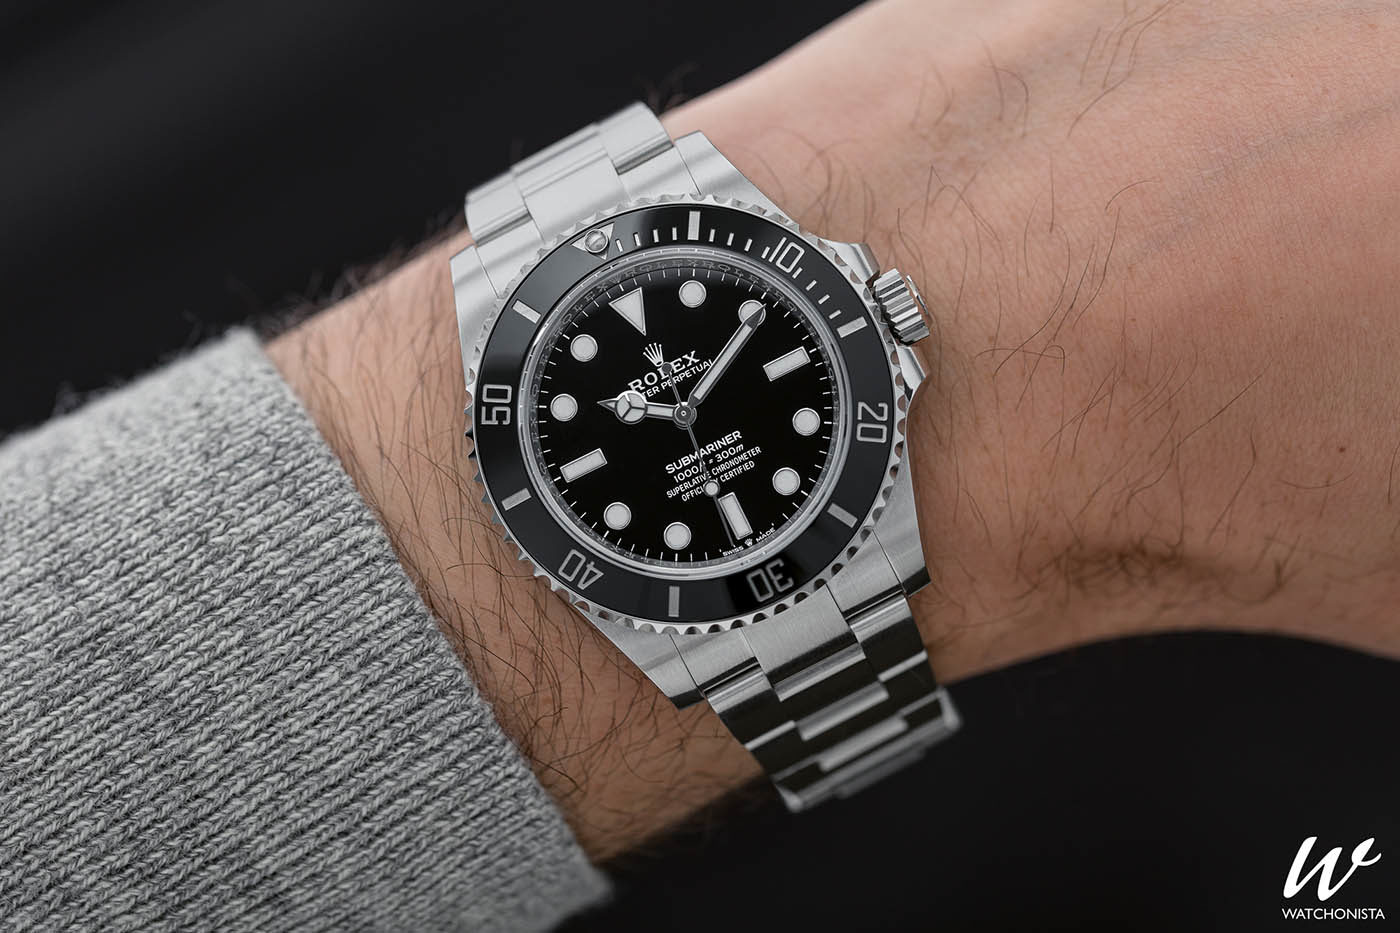 The Rolex Submariner In 2020: What's 